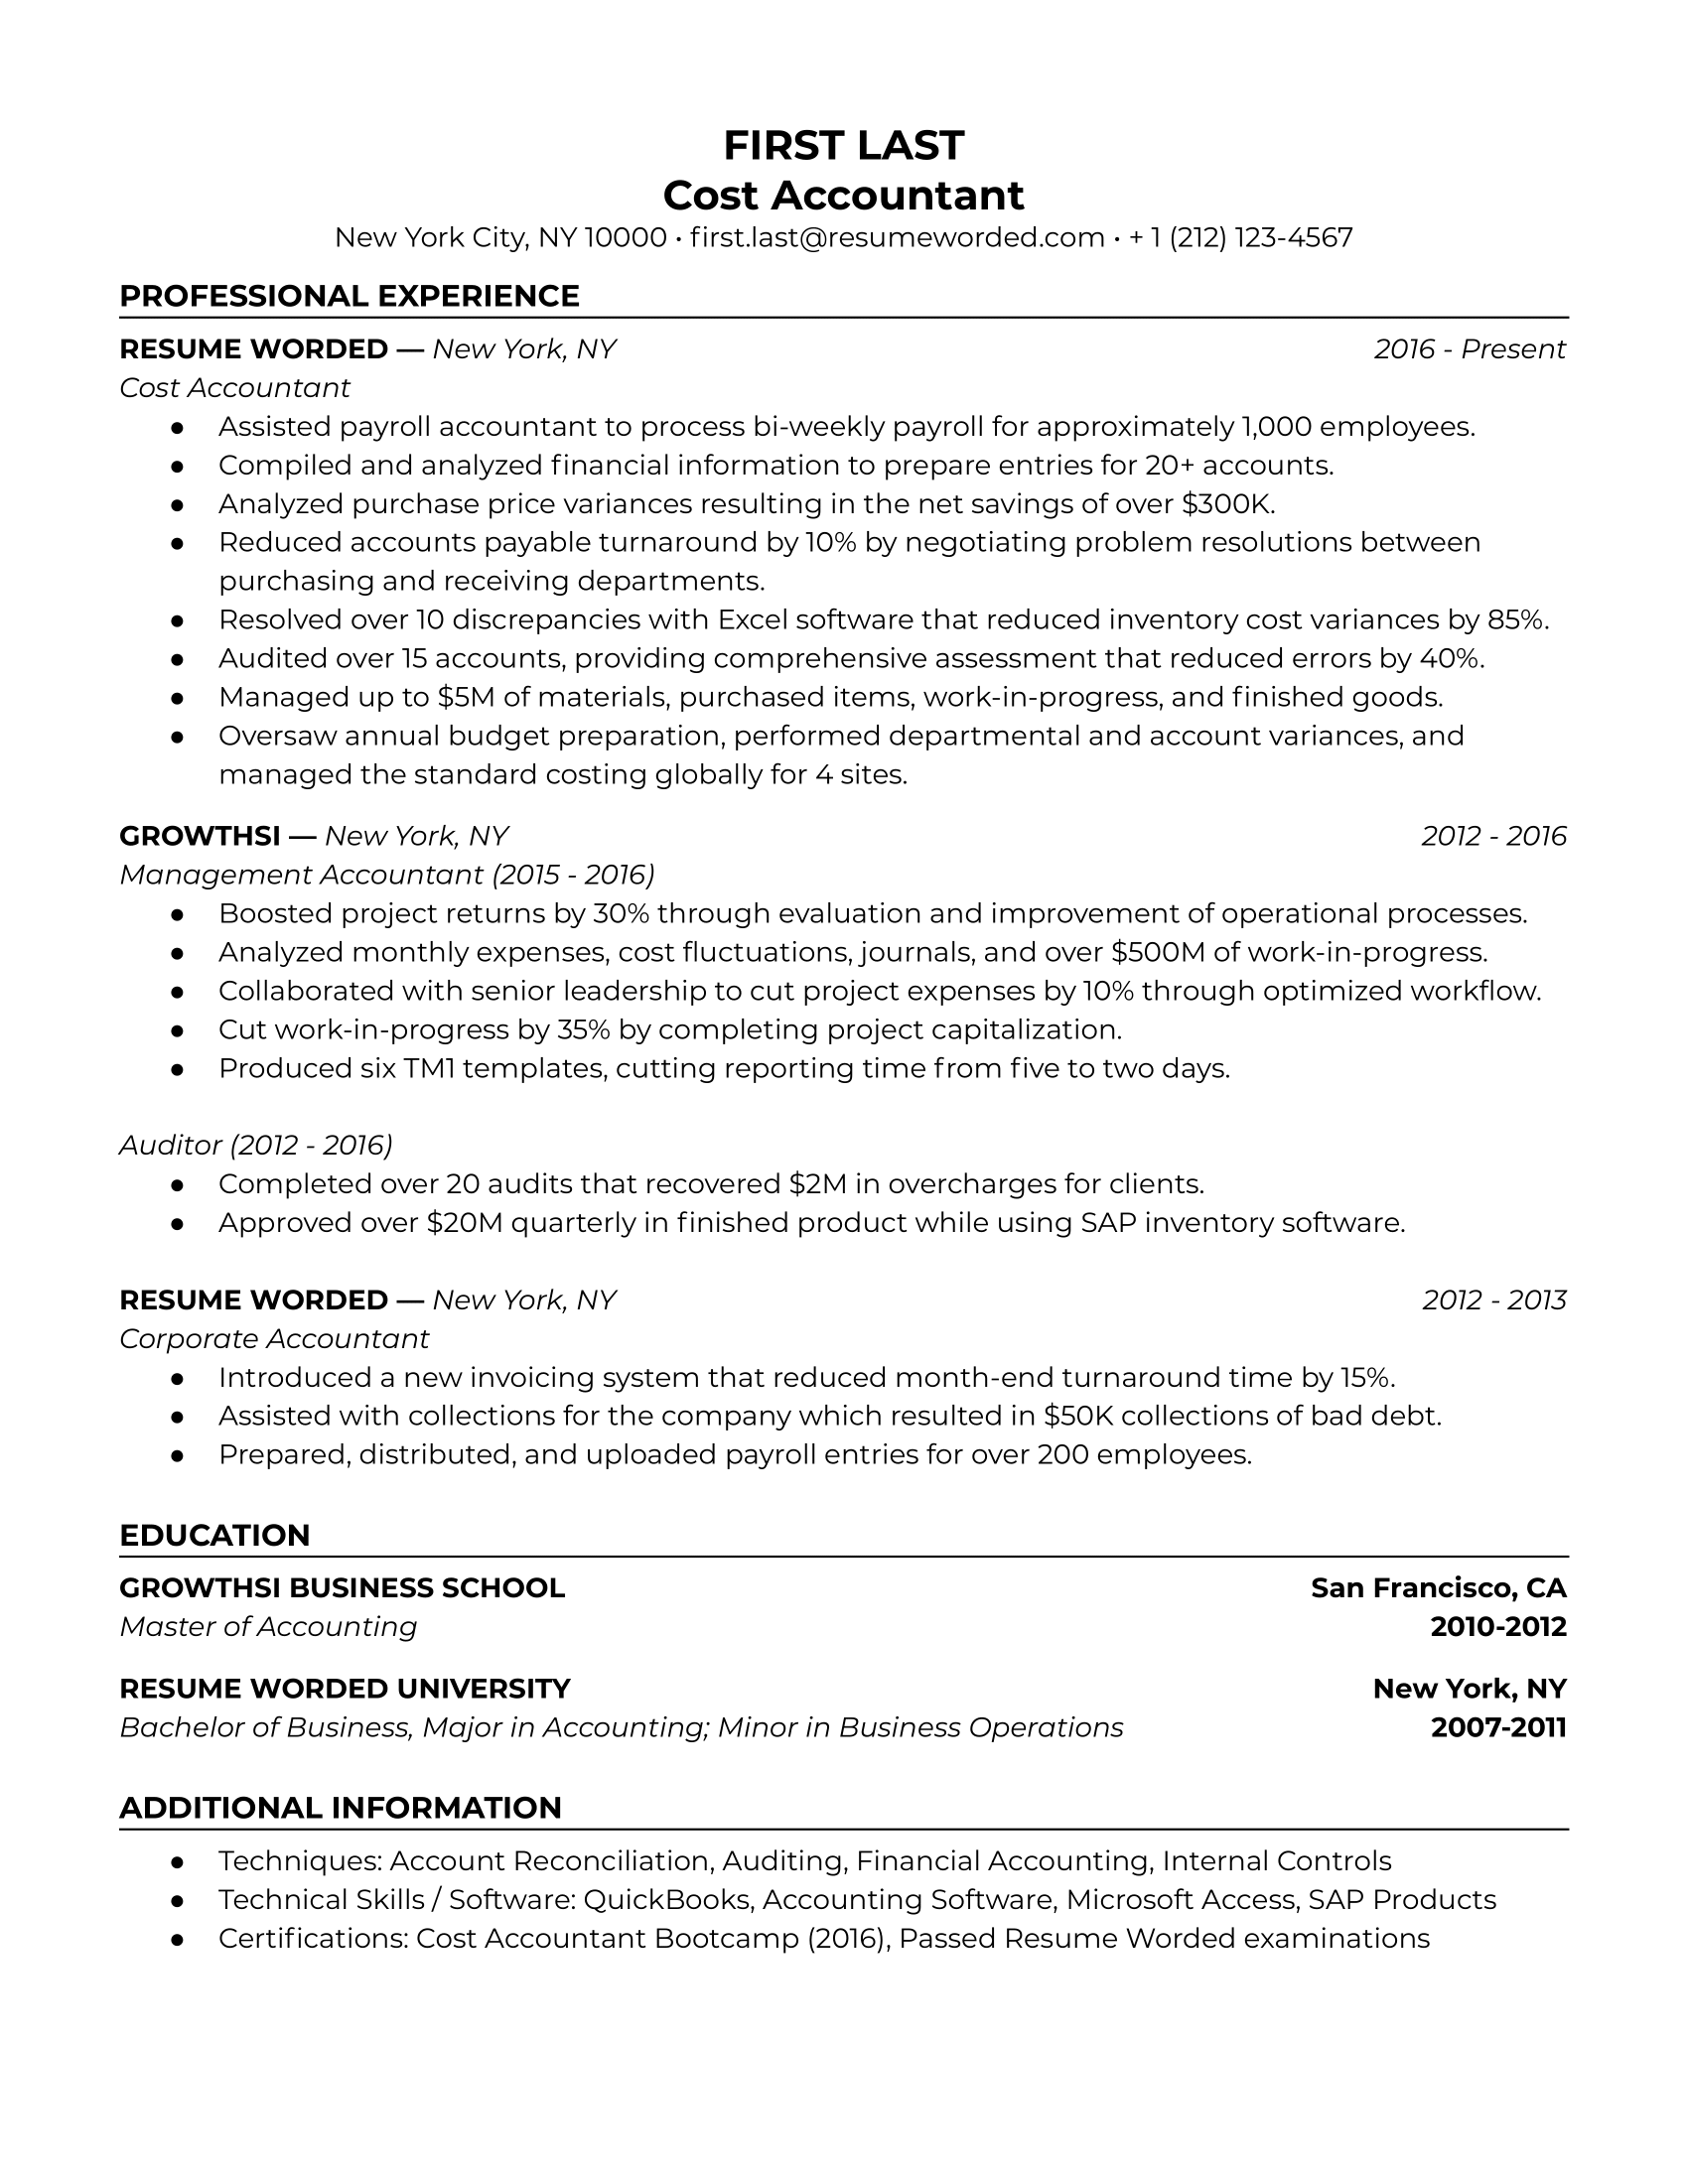 Cost Accountant Resume Sample